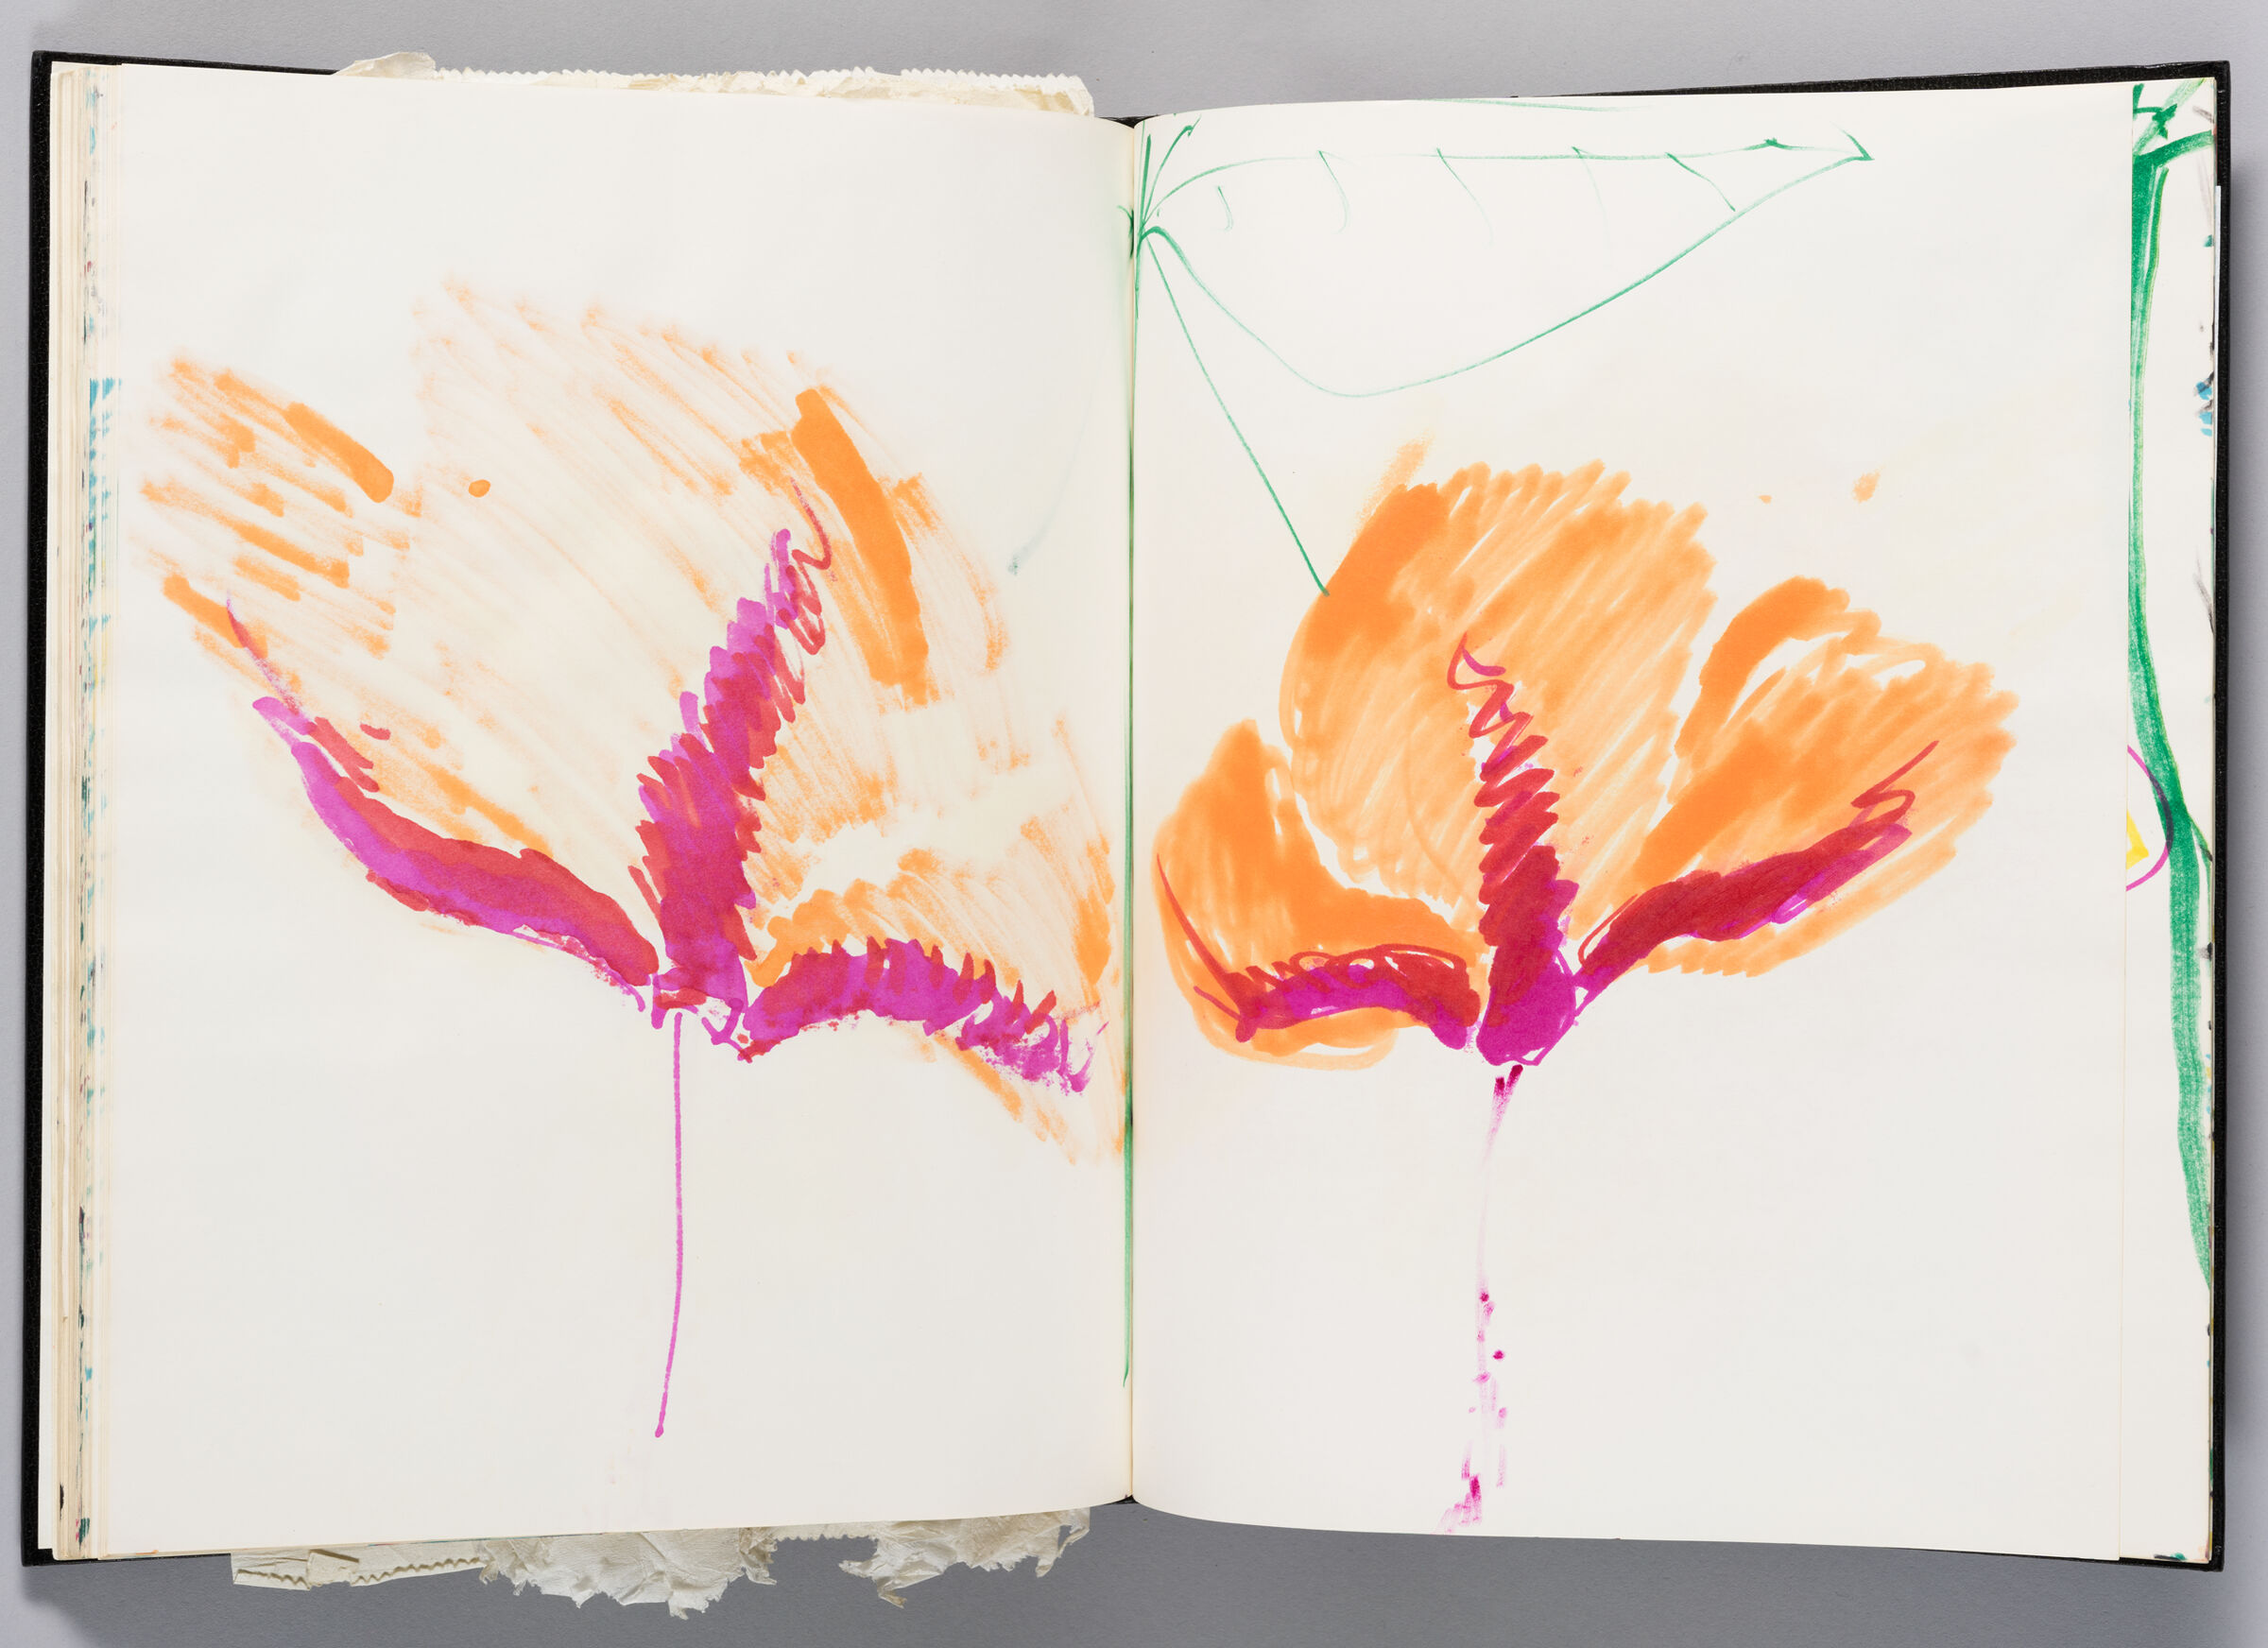 Untitled (Bleed-Through Of Previous Page, Left Page); Untitled (Hibiscus Flower, Right Page)
